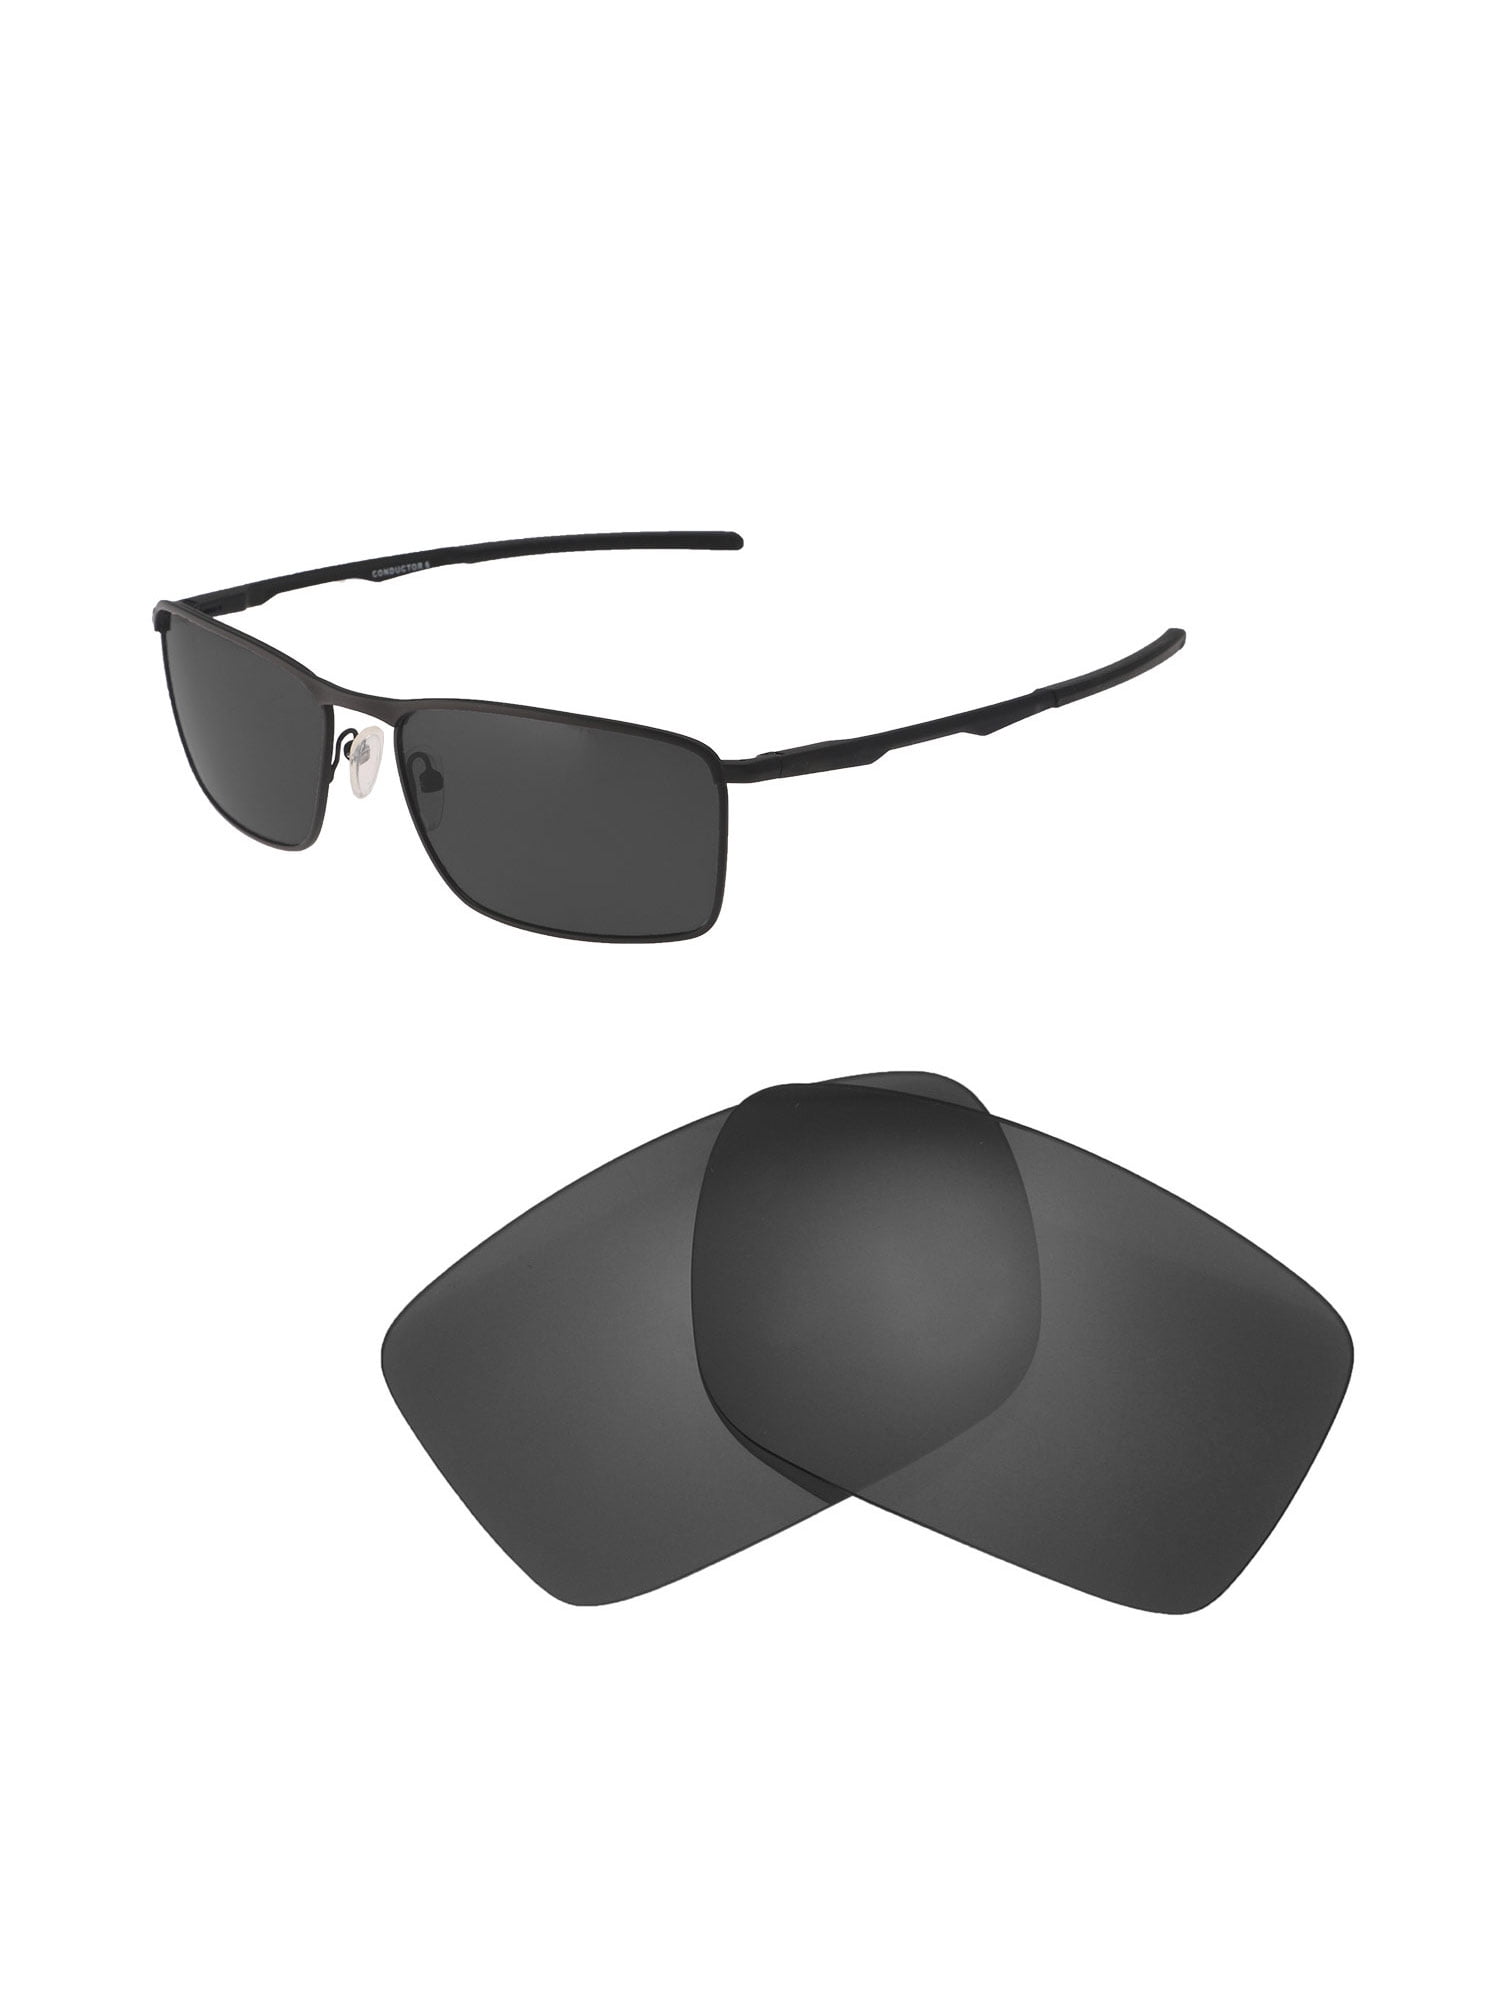 oakley conductor 6 replacement nose pads